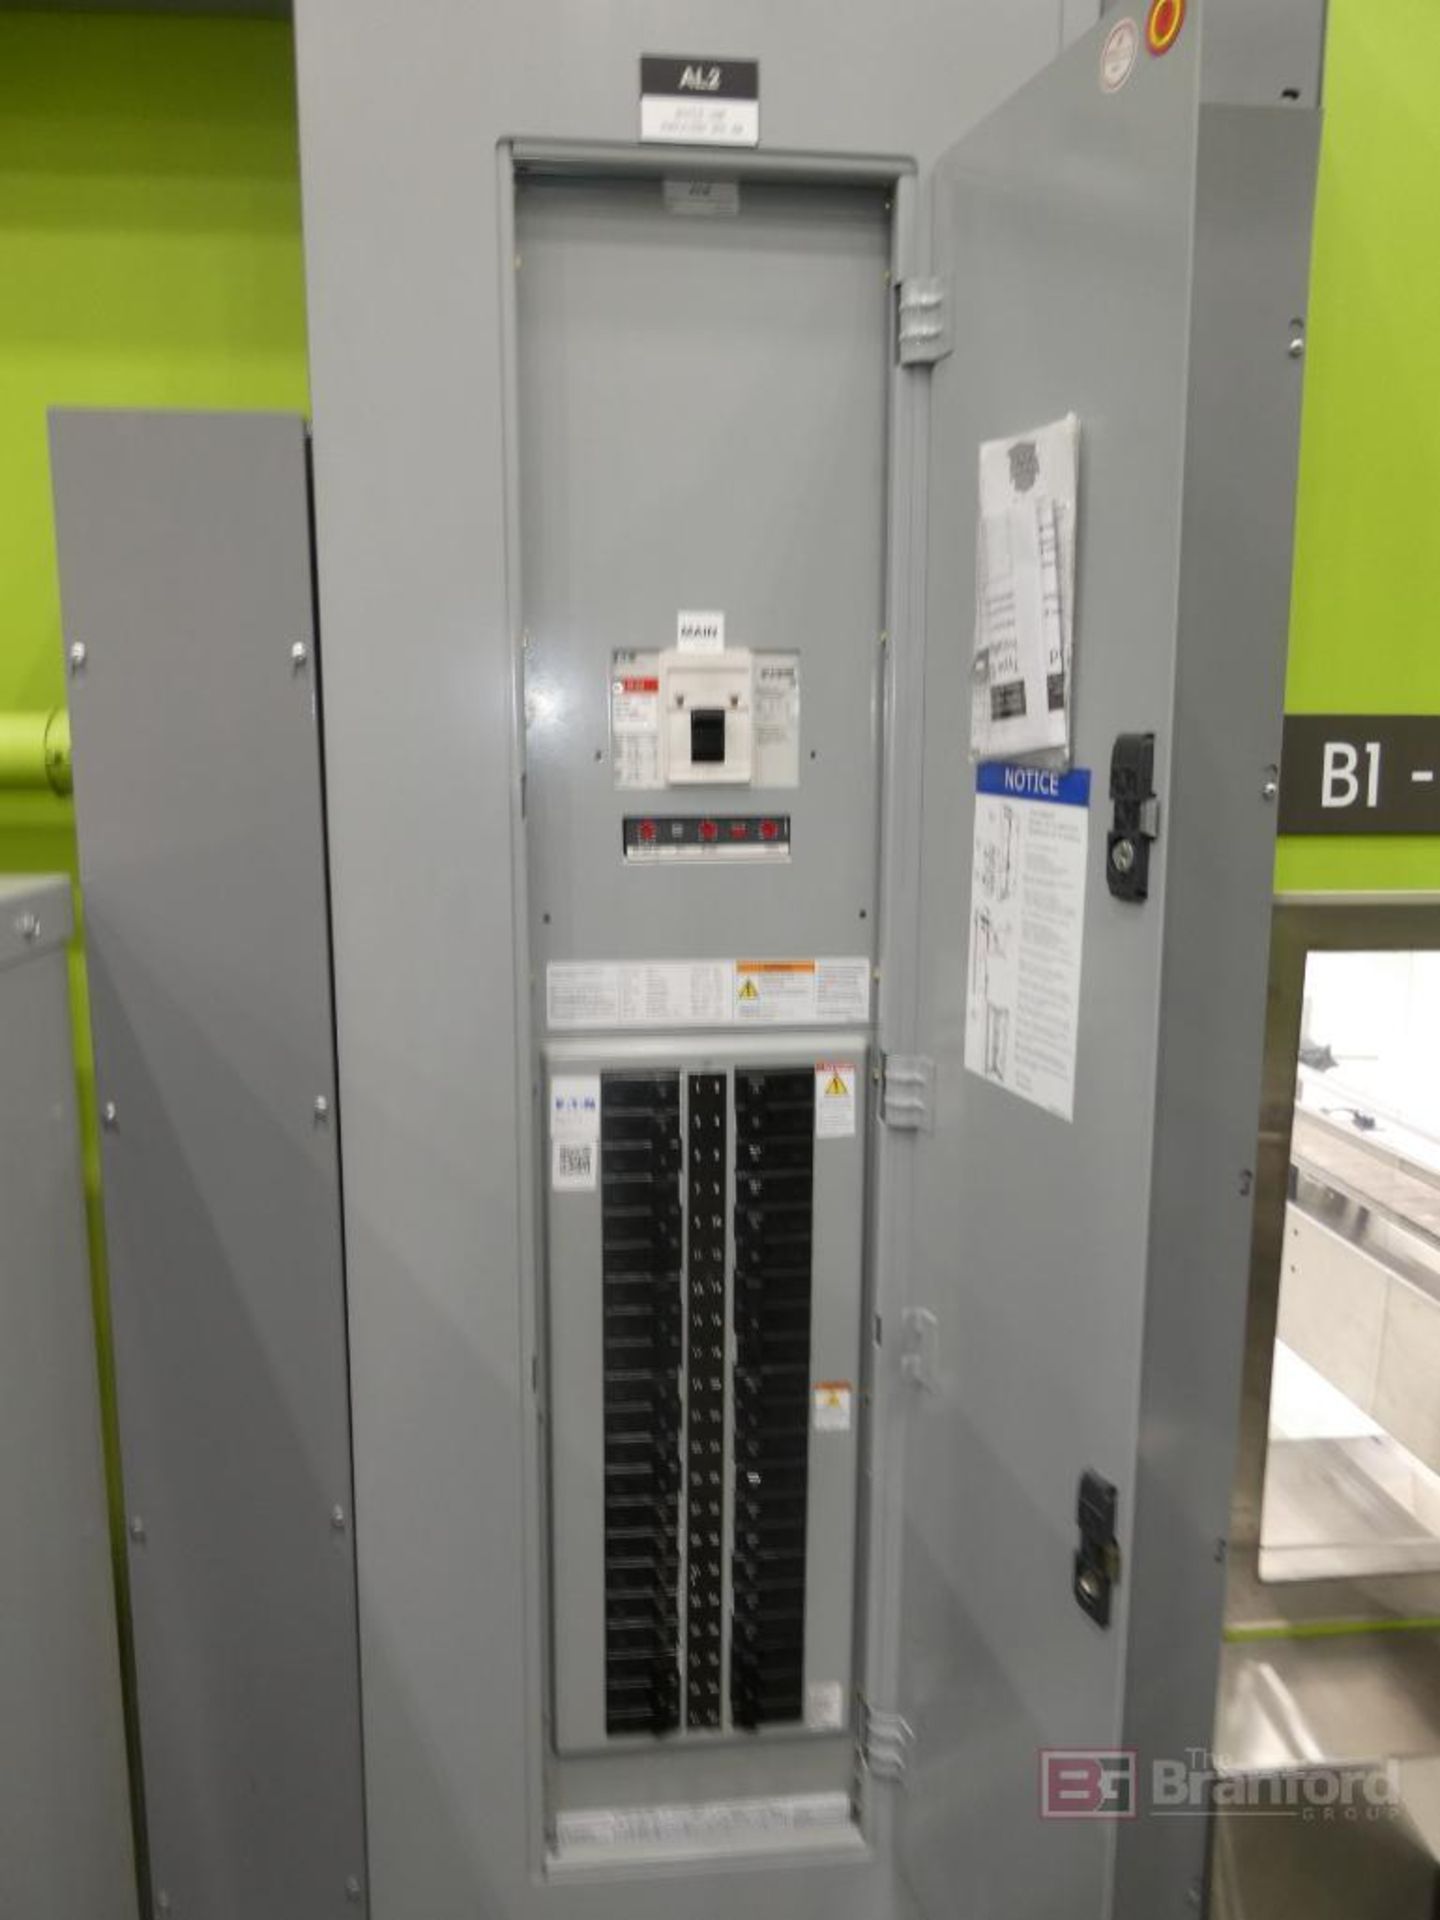 2020 Eaton Electrical Panels and Type DT-3 Transformer - Image 4 of 4